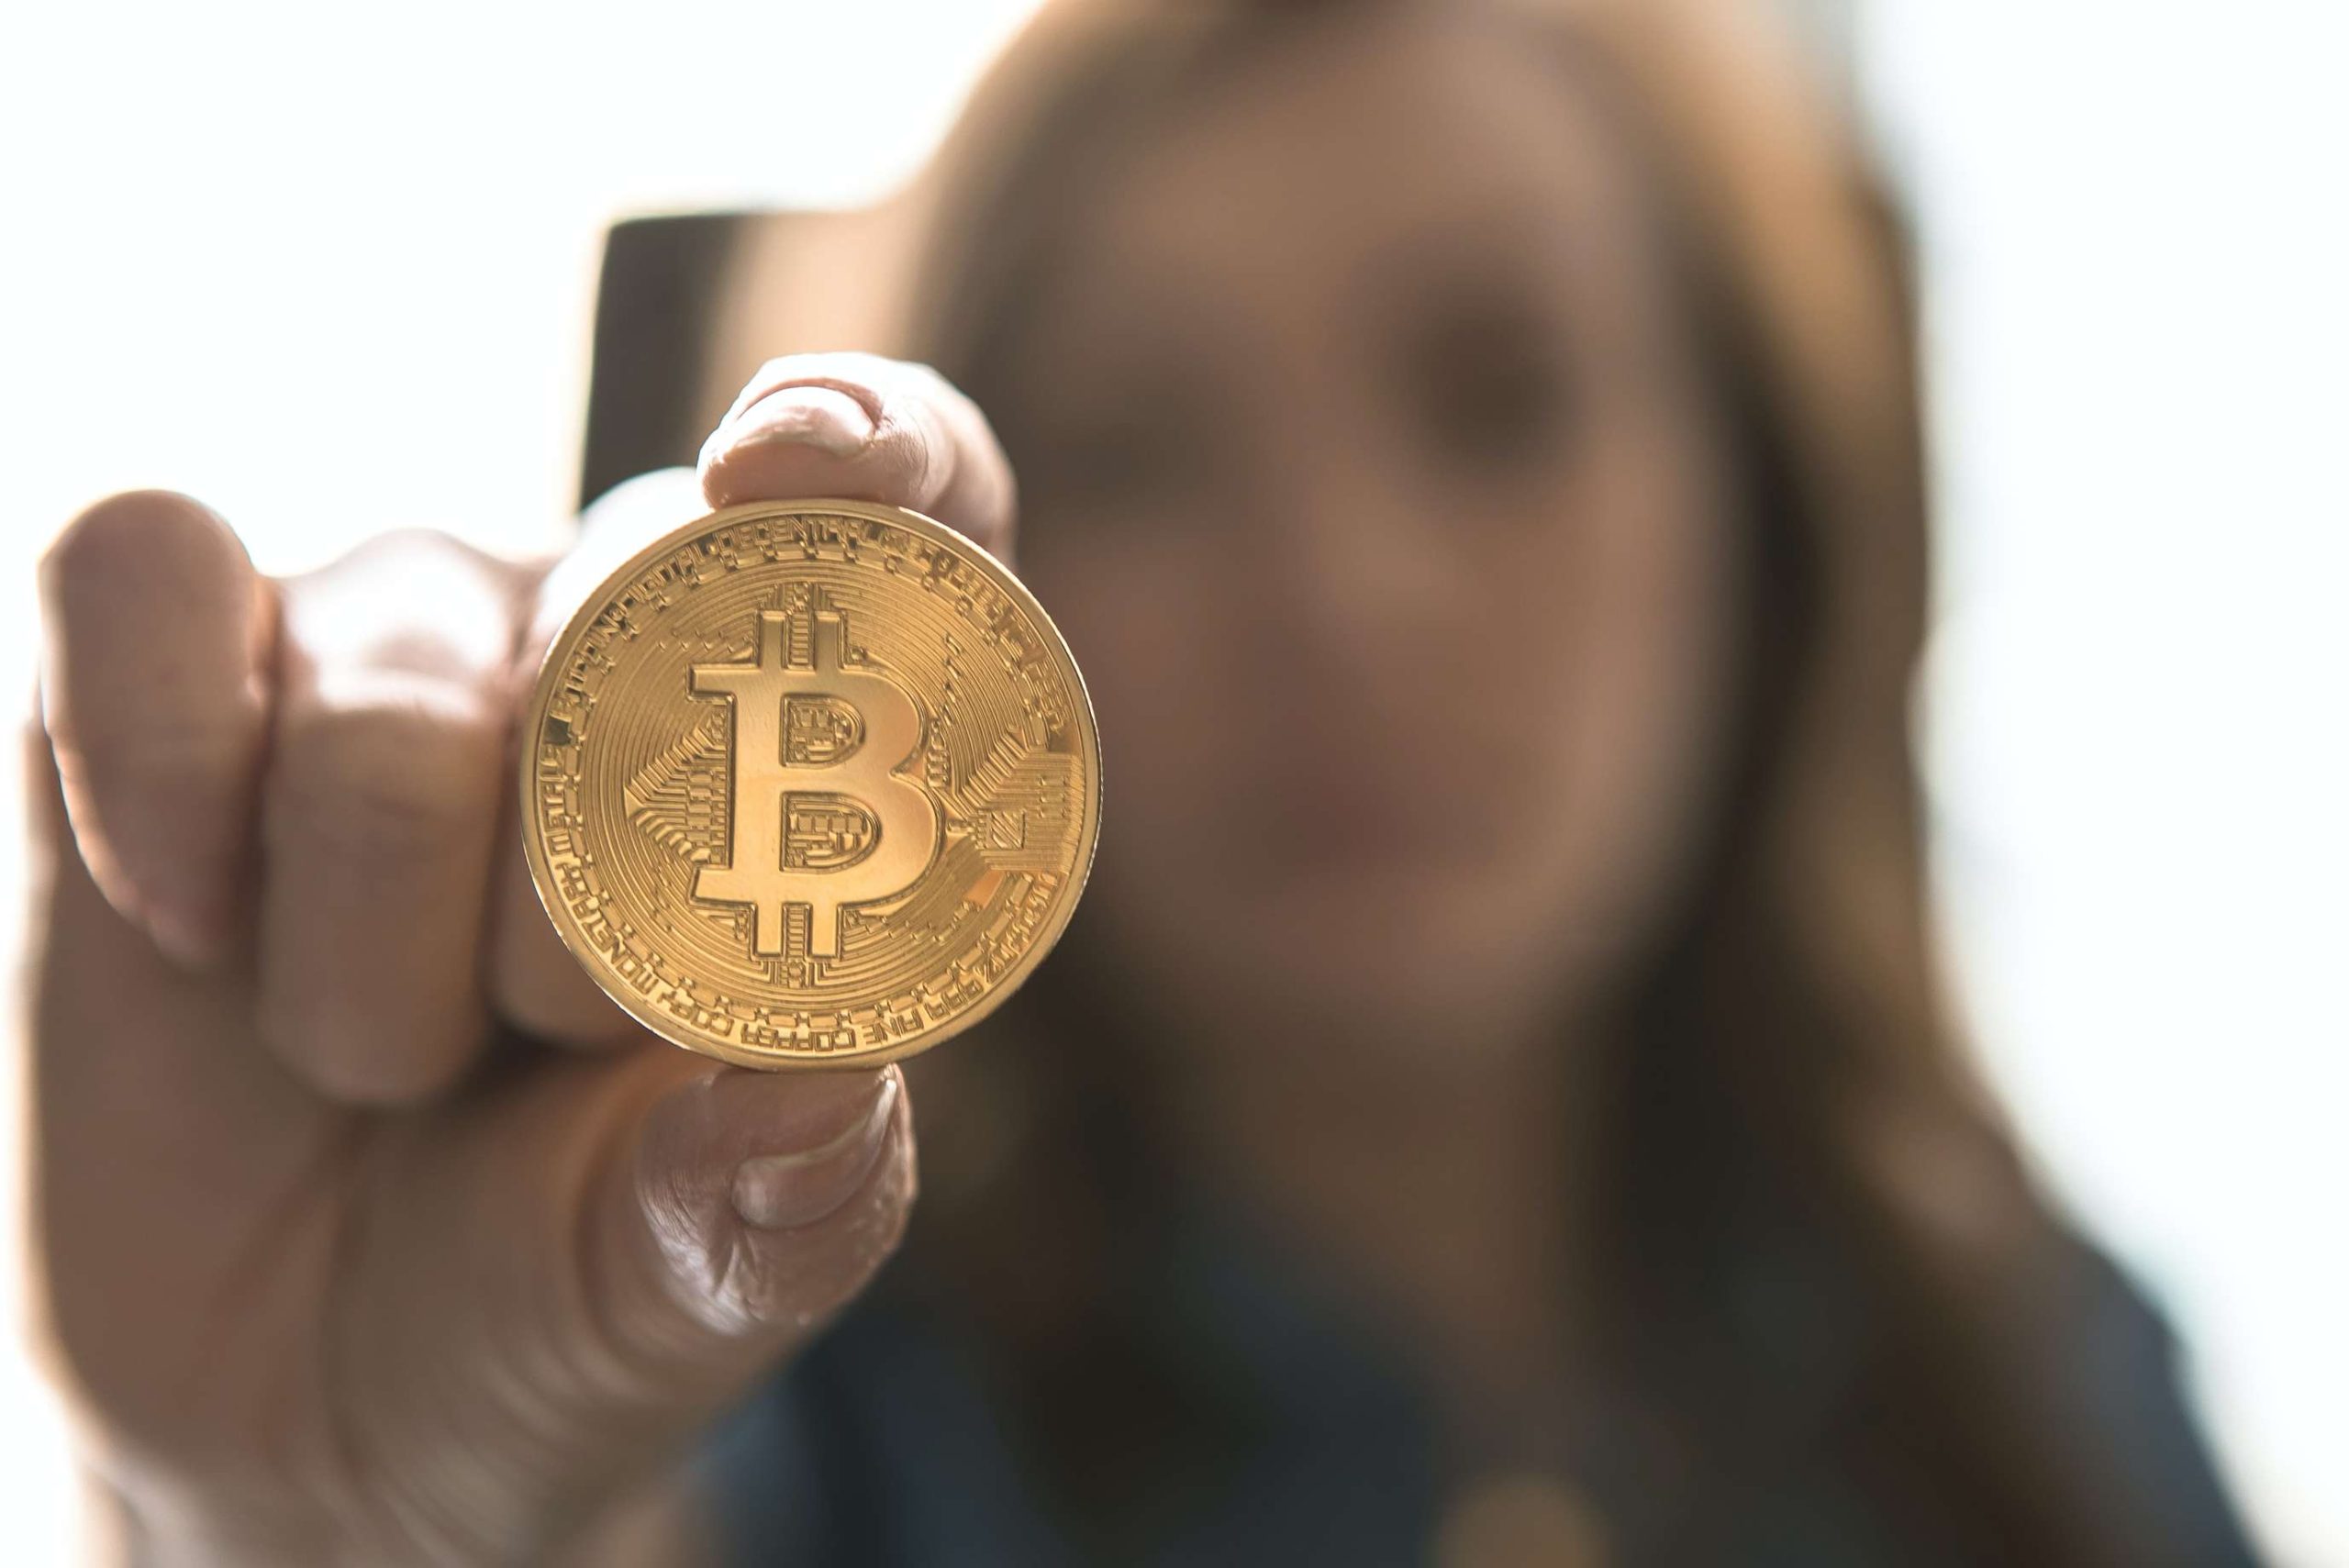 Bitcoin: What Is It and Is It Real?